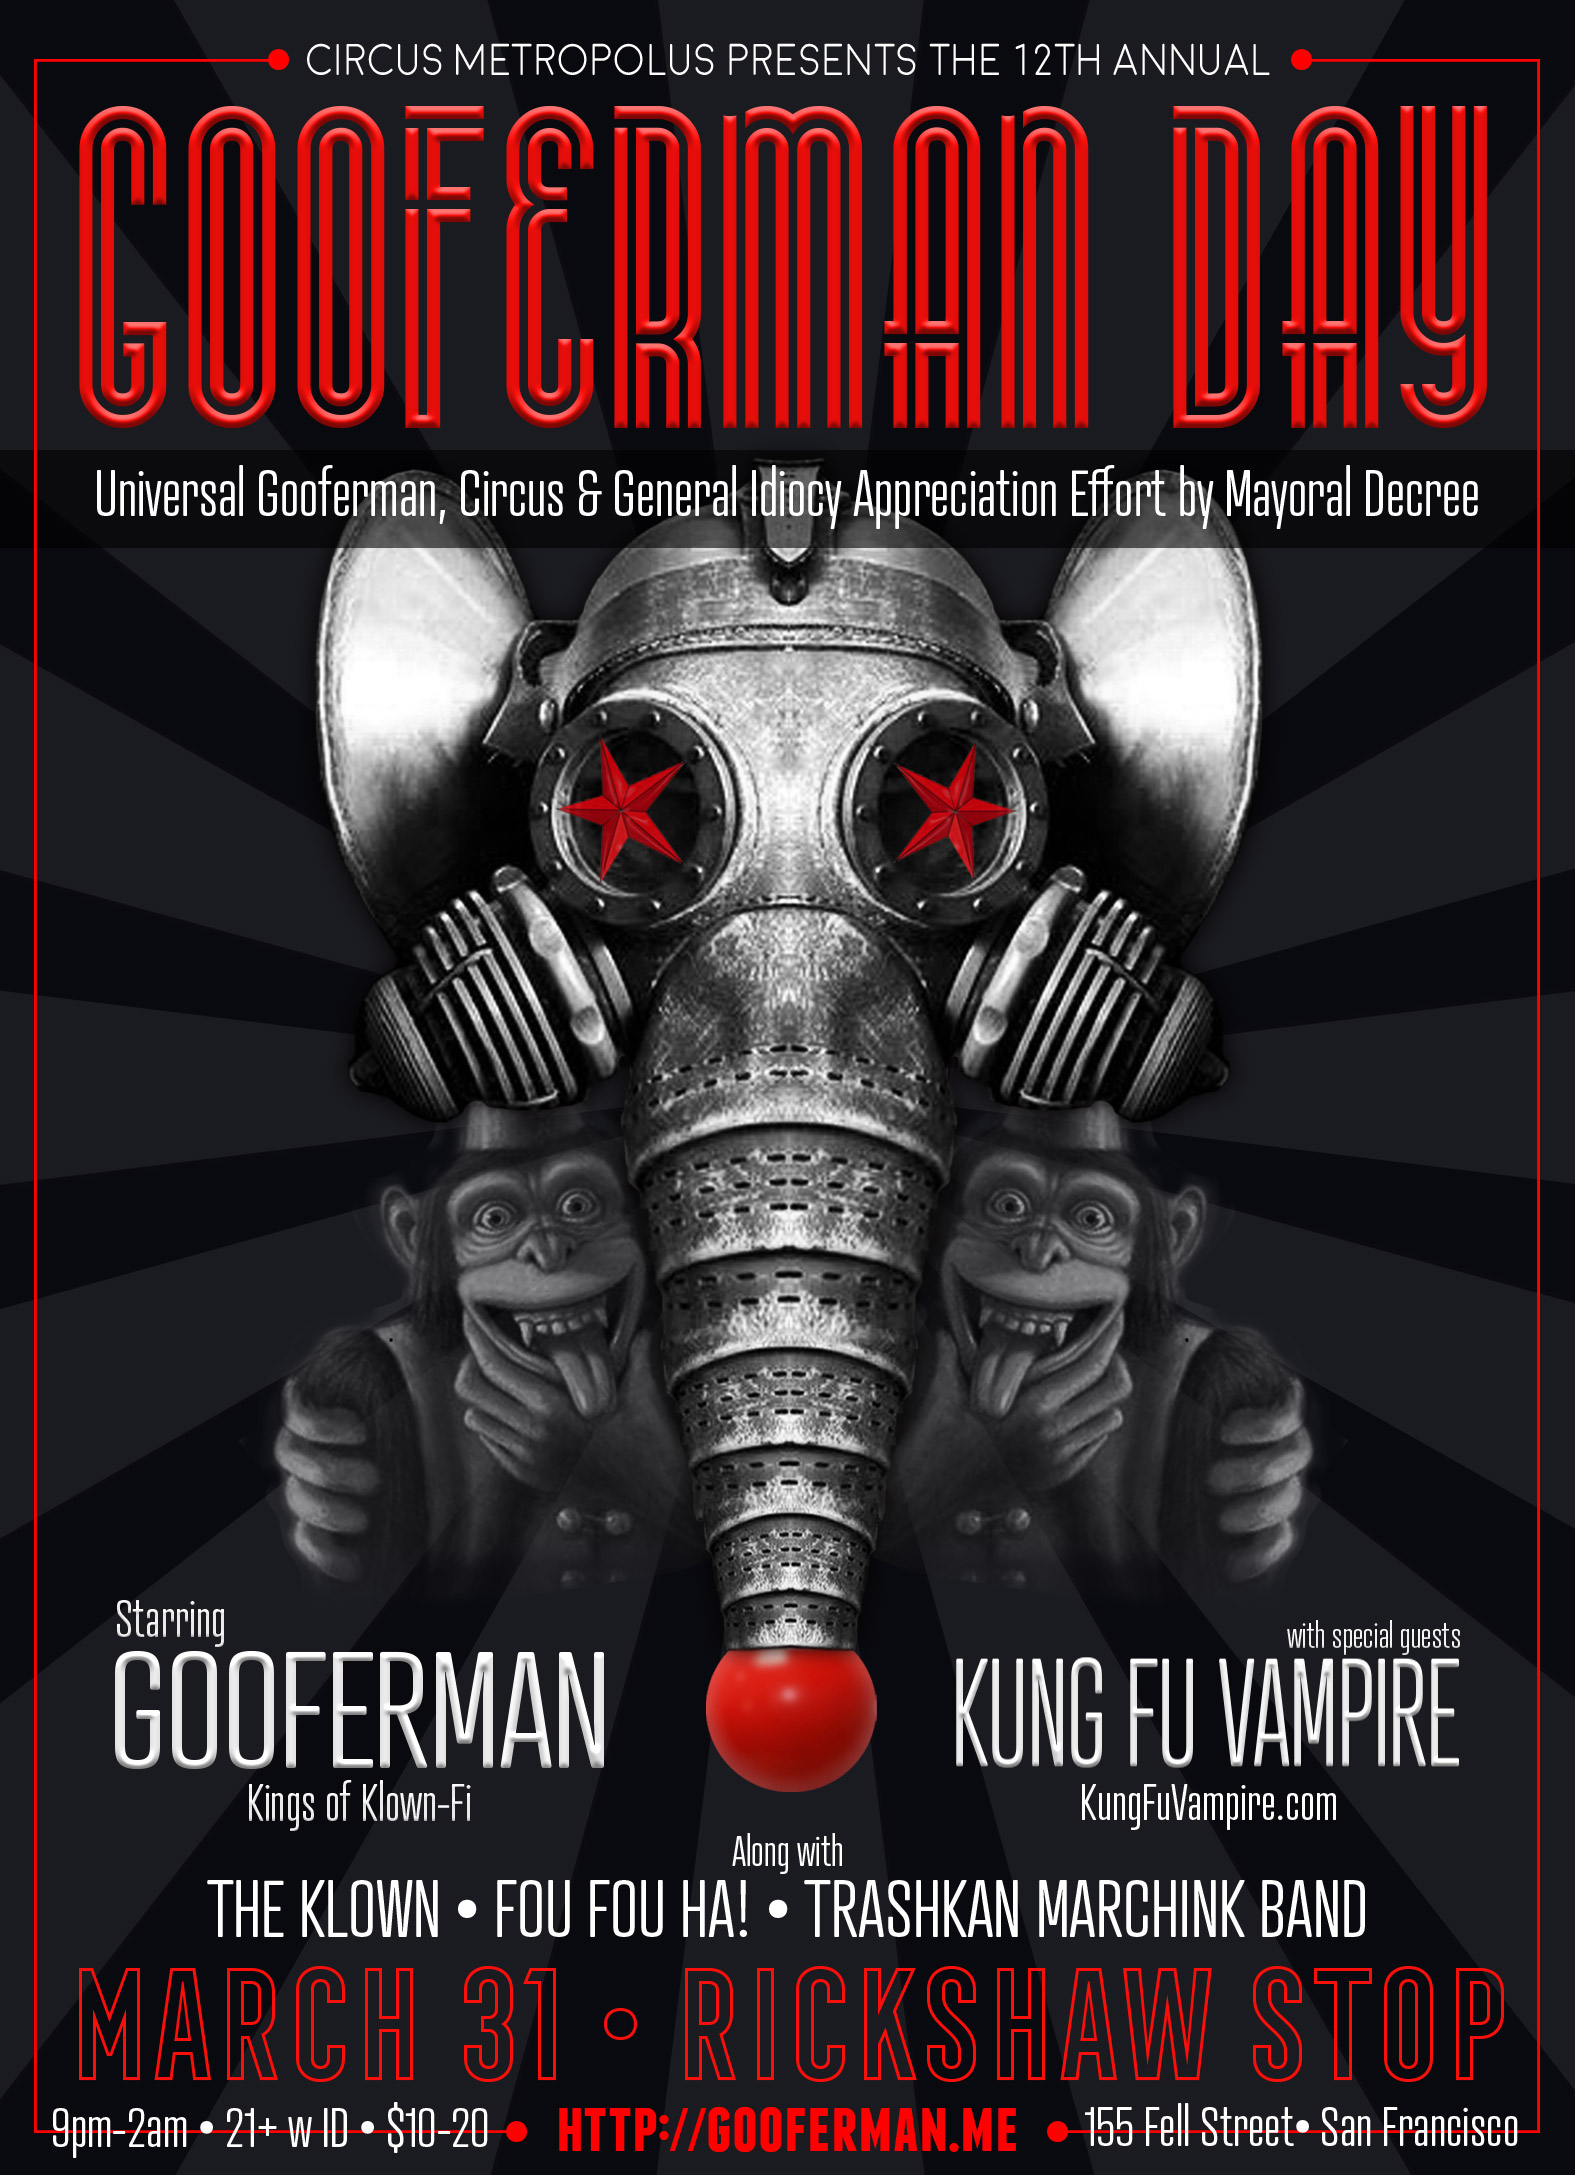 Circus Metropolus presents the 12th Annual Gooferman Day celebration, starring Gooferman, The Klown, Fou Fou Ha!, TrashKan Marchink Band, and utter Special Guests - Saturday, March 31, 2018 - Rickshaw Stop in San Francisco